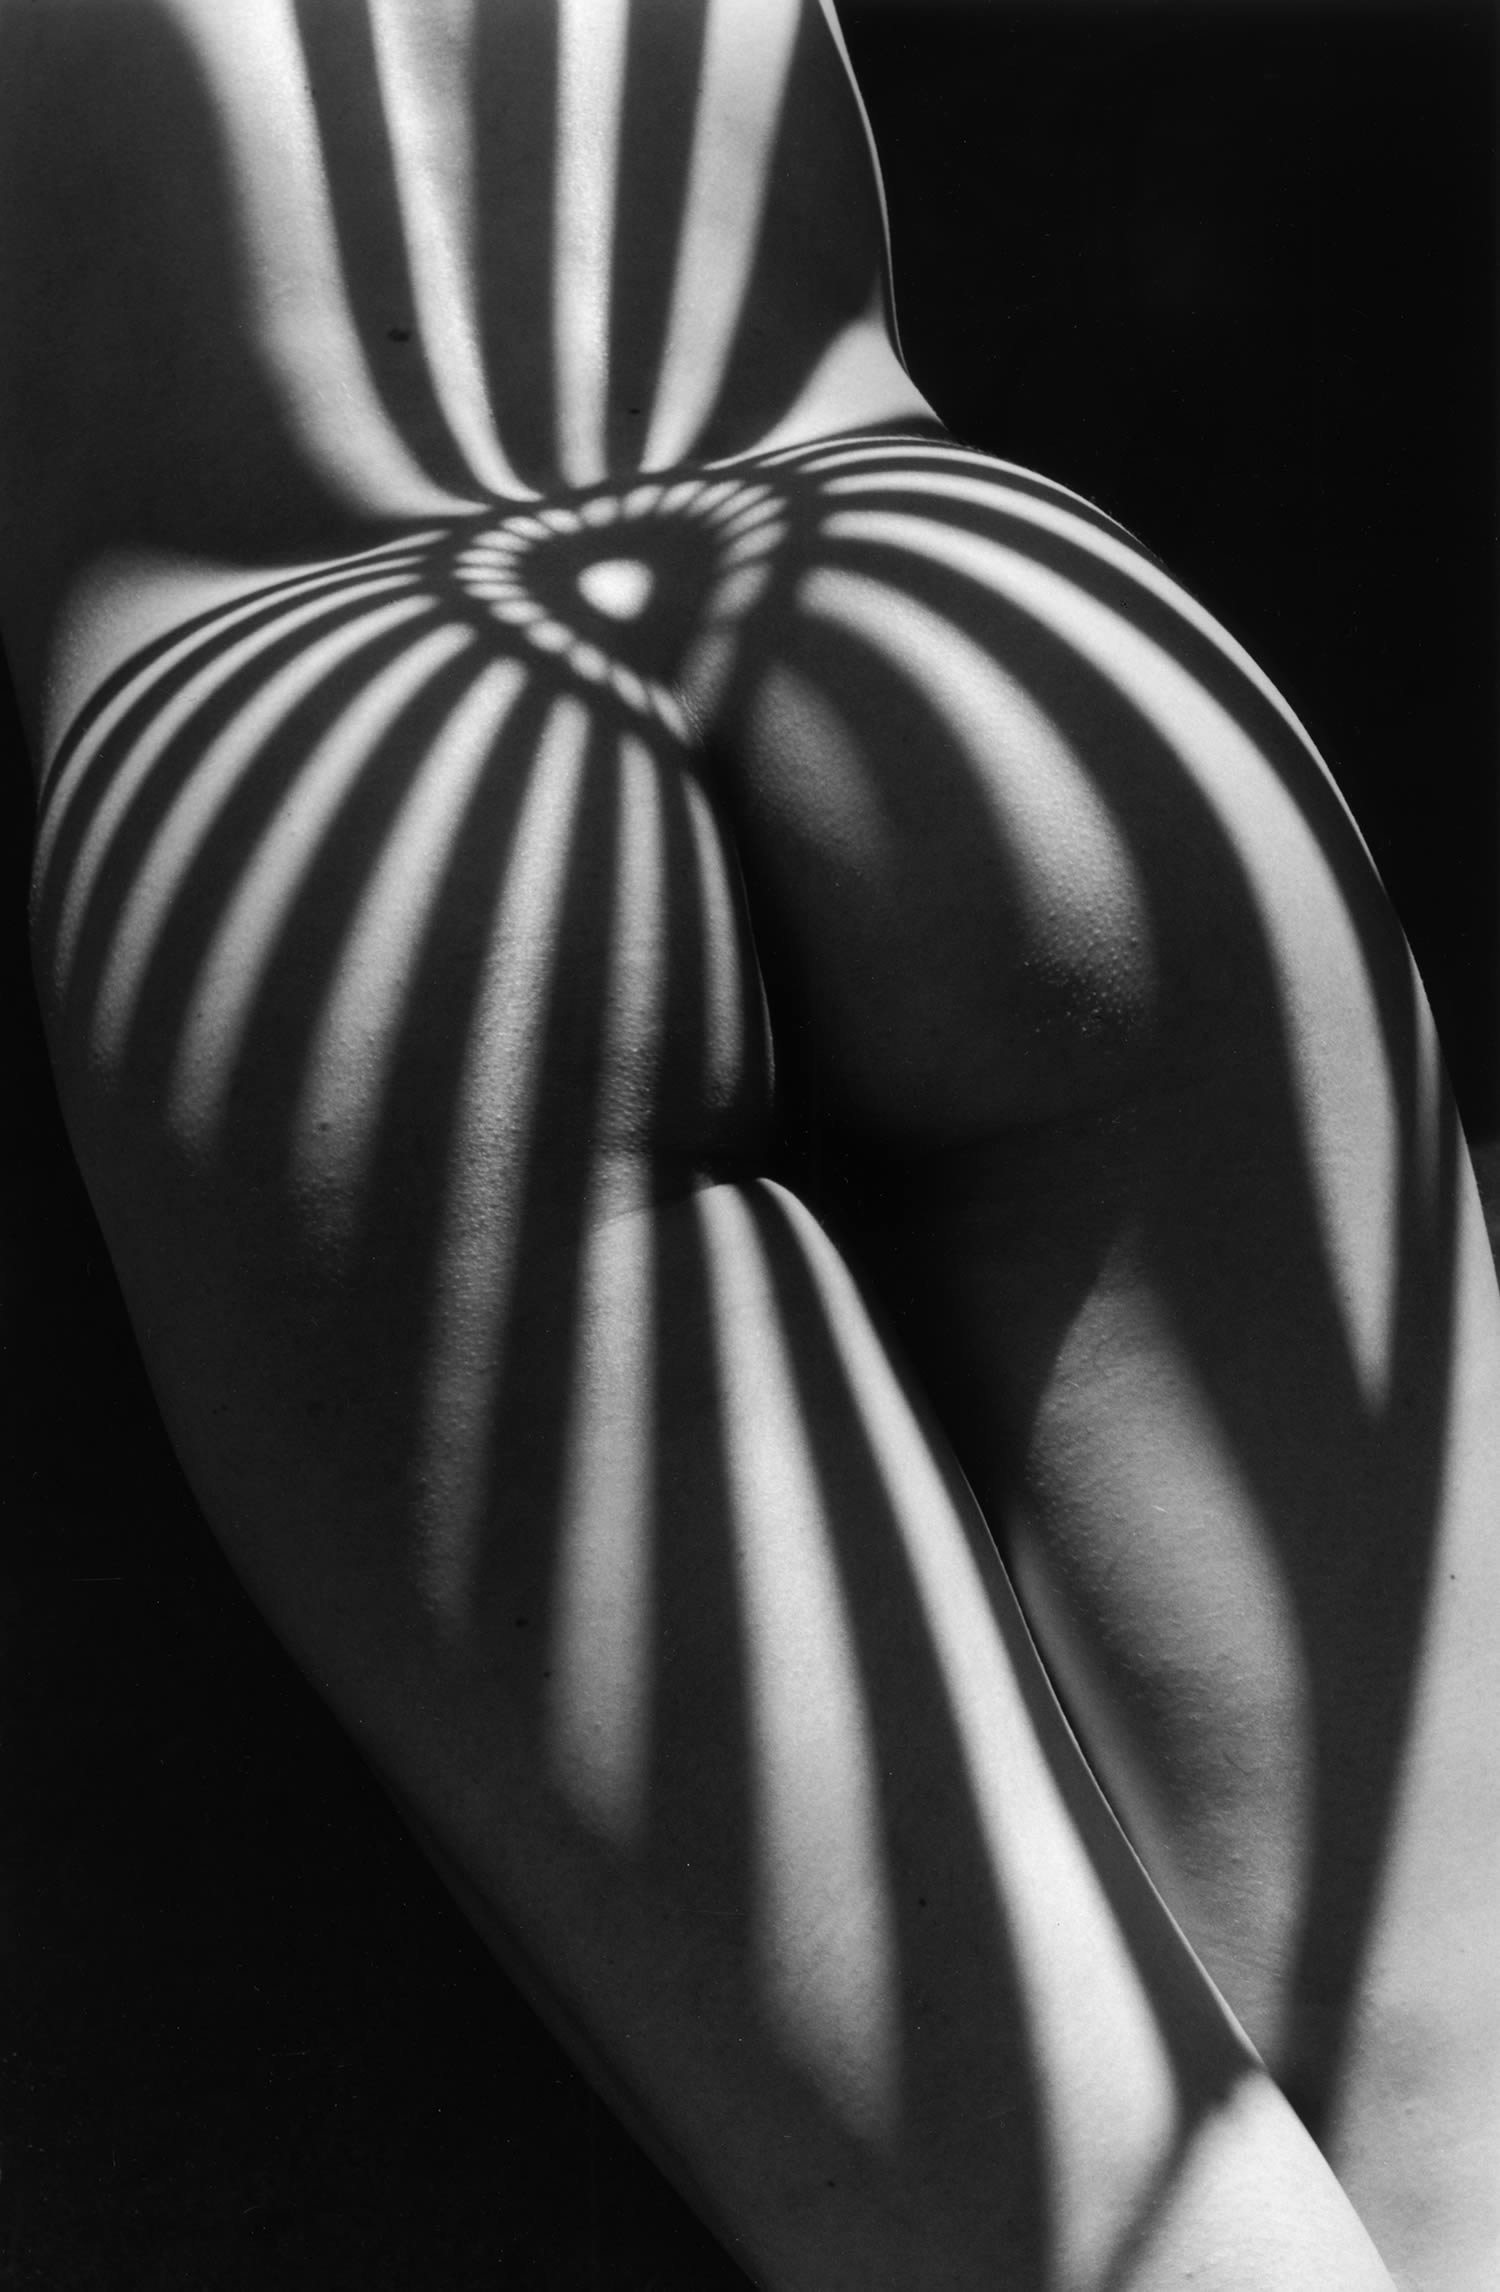 buttlocks with pattern, zebra striped nude, photography by lucien clergue